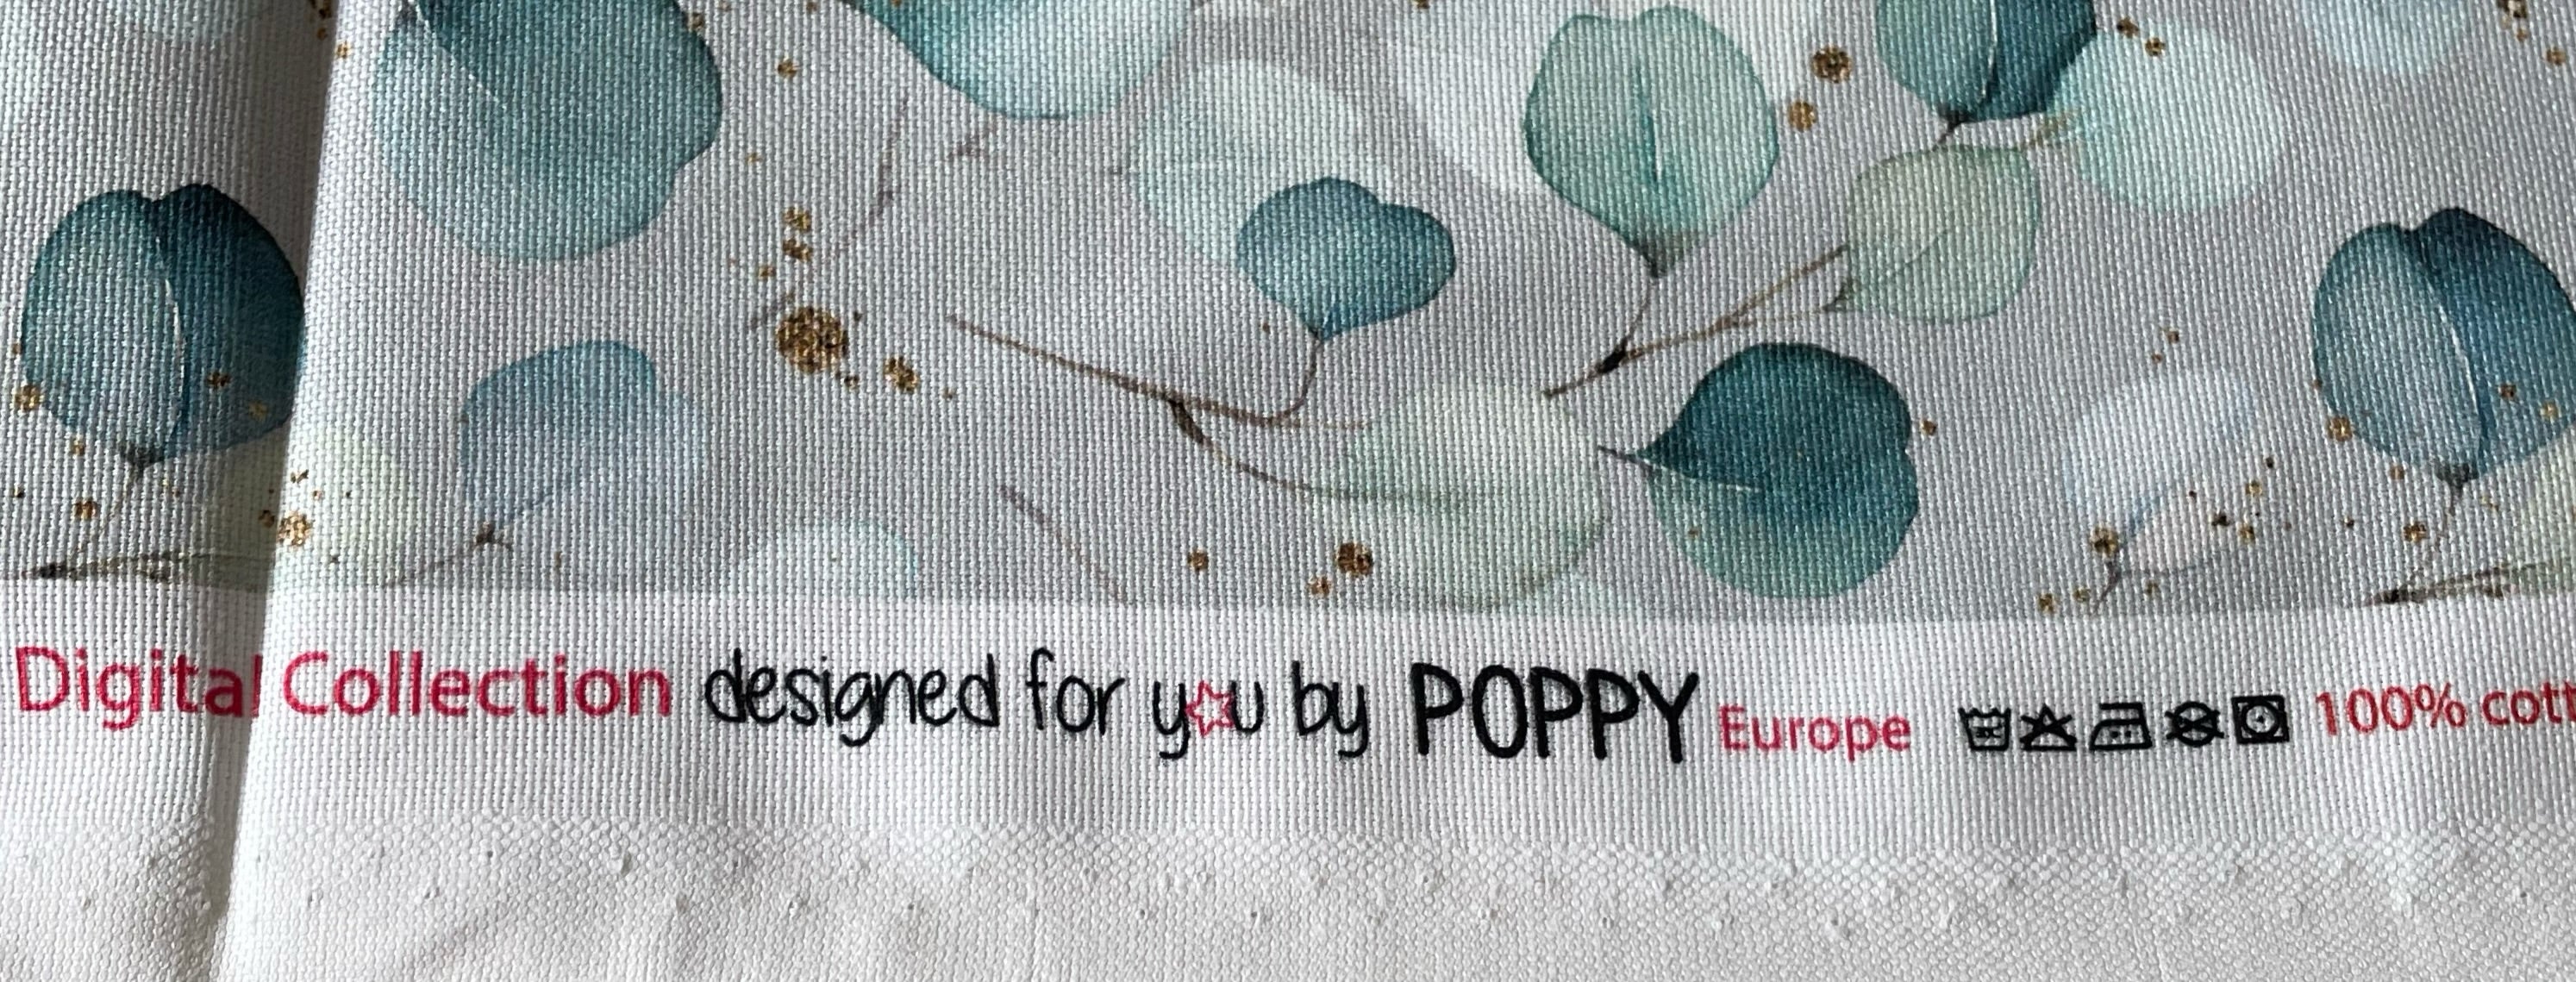 Digital collection designed for you by Poppy europe 